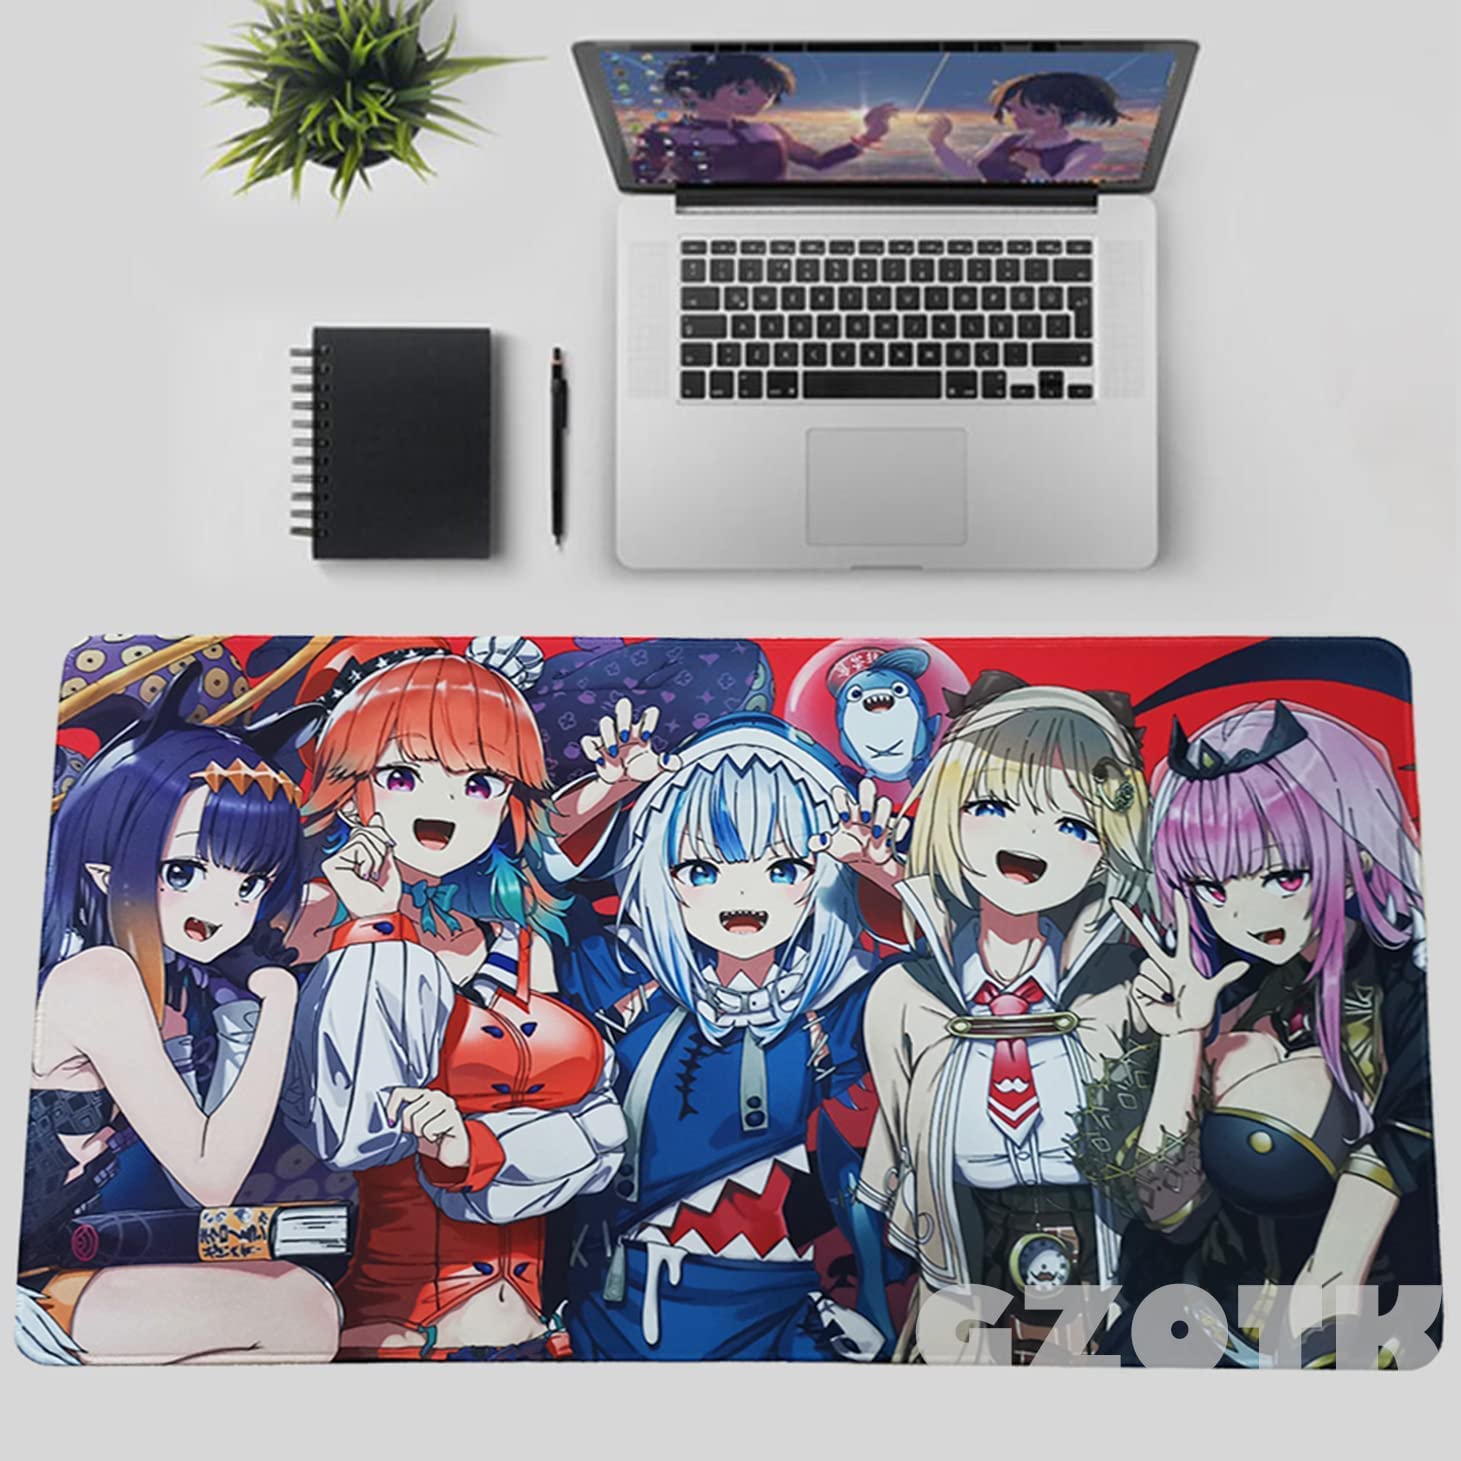 Manga character dressed in black anime mouse mat - TenStickers